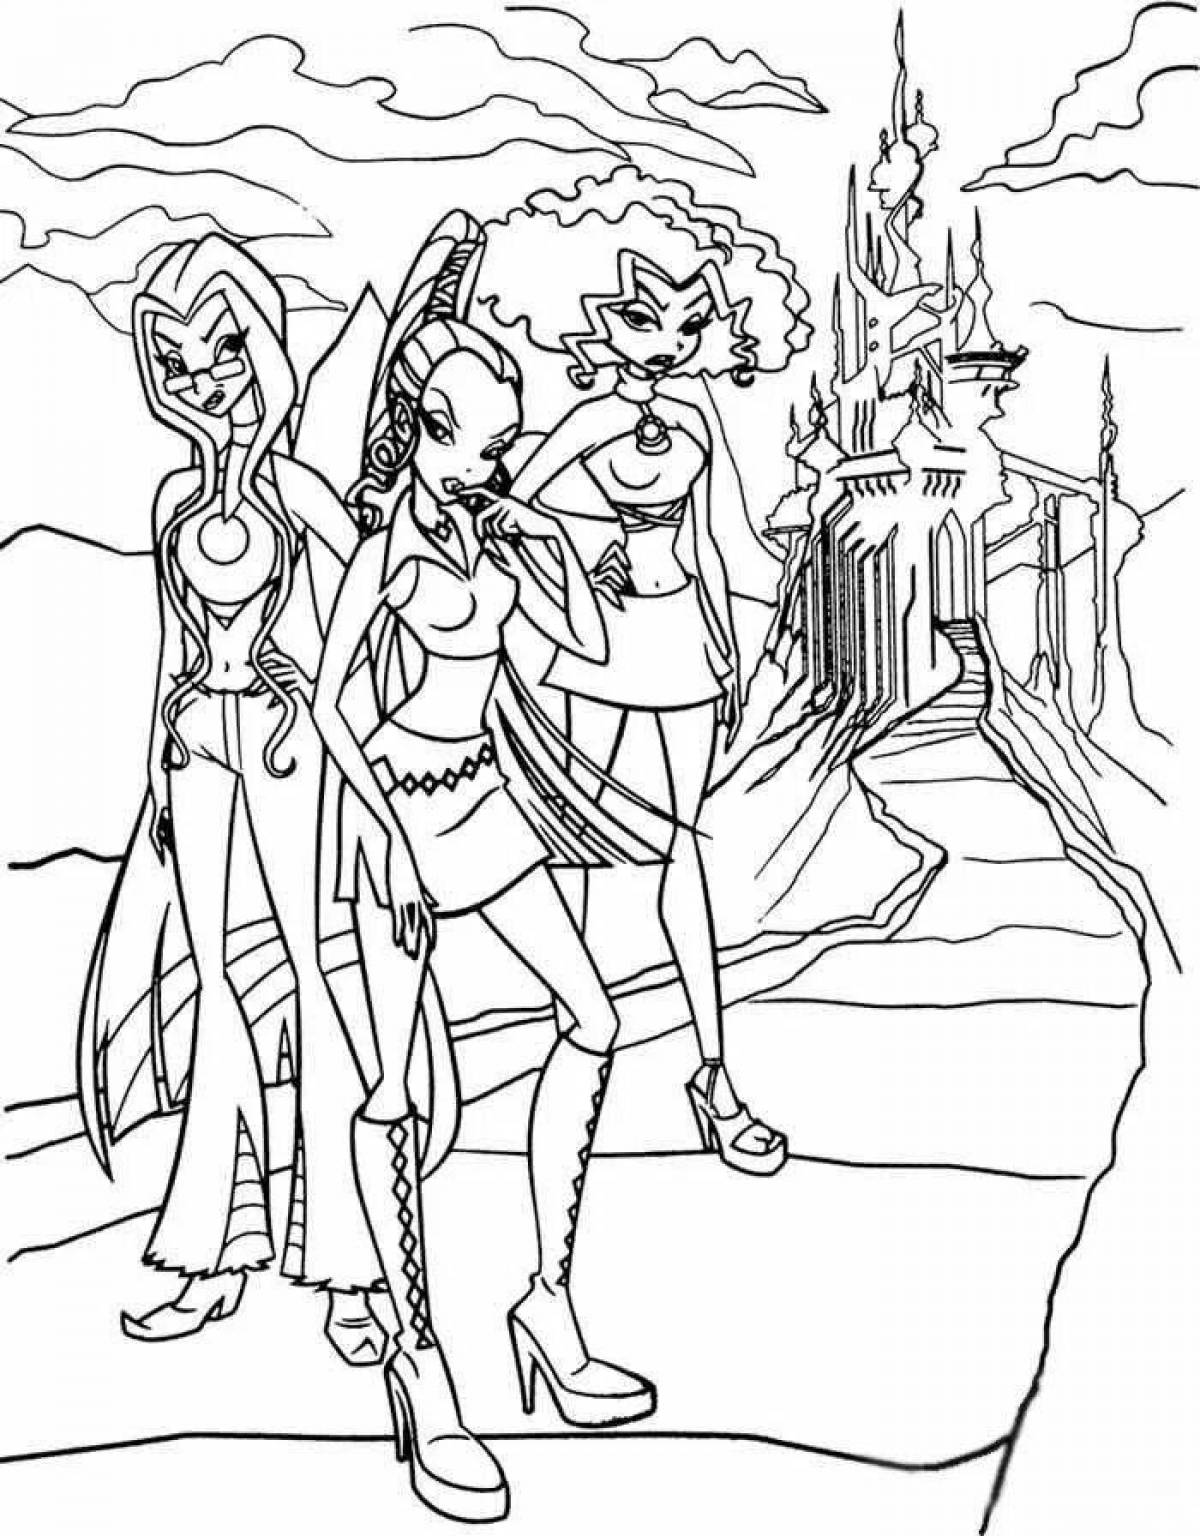 Winx games glowing coloring pages